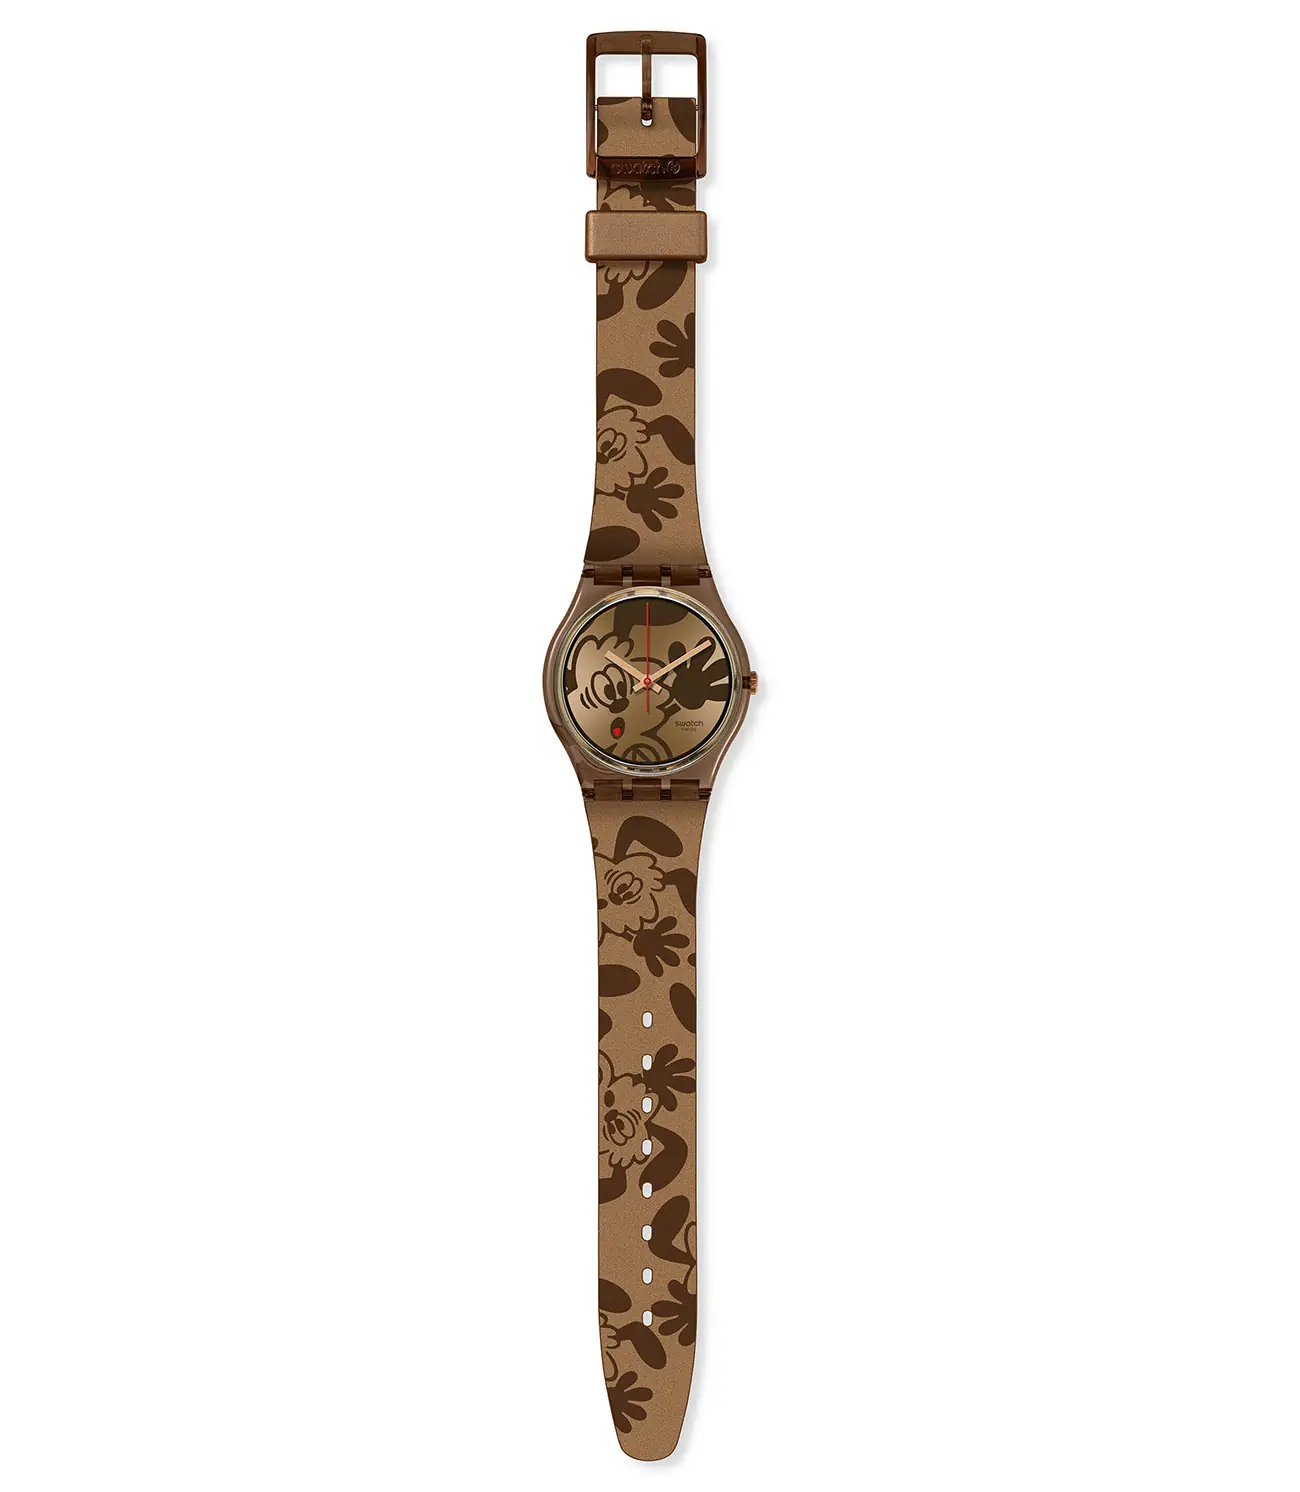 Swatch and Verdy present the playful timepiece Vick Bronze by Verdy